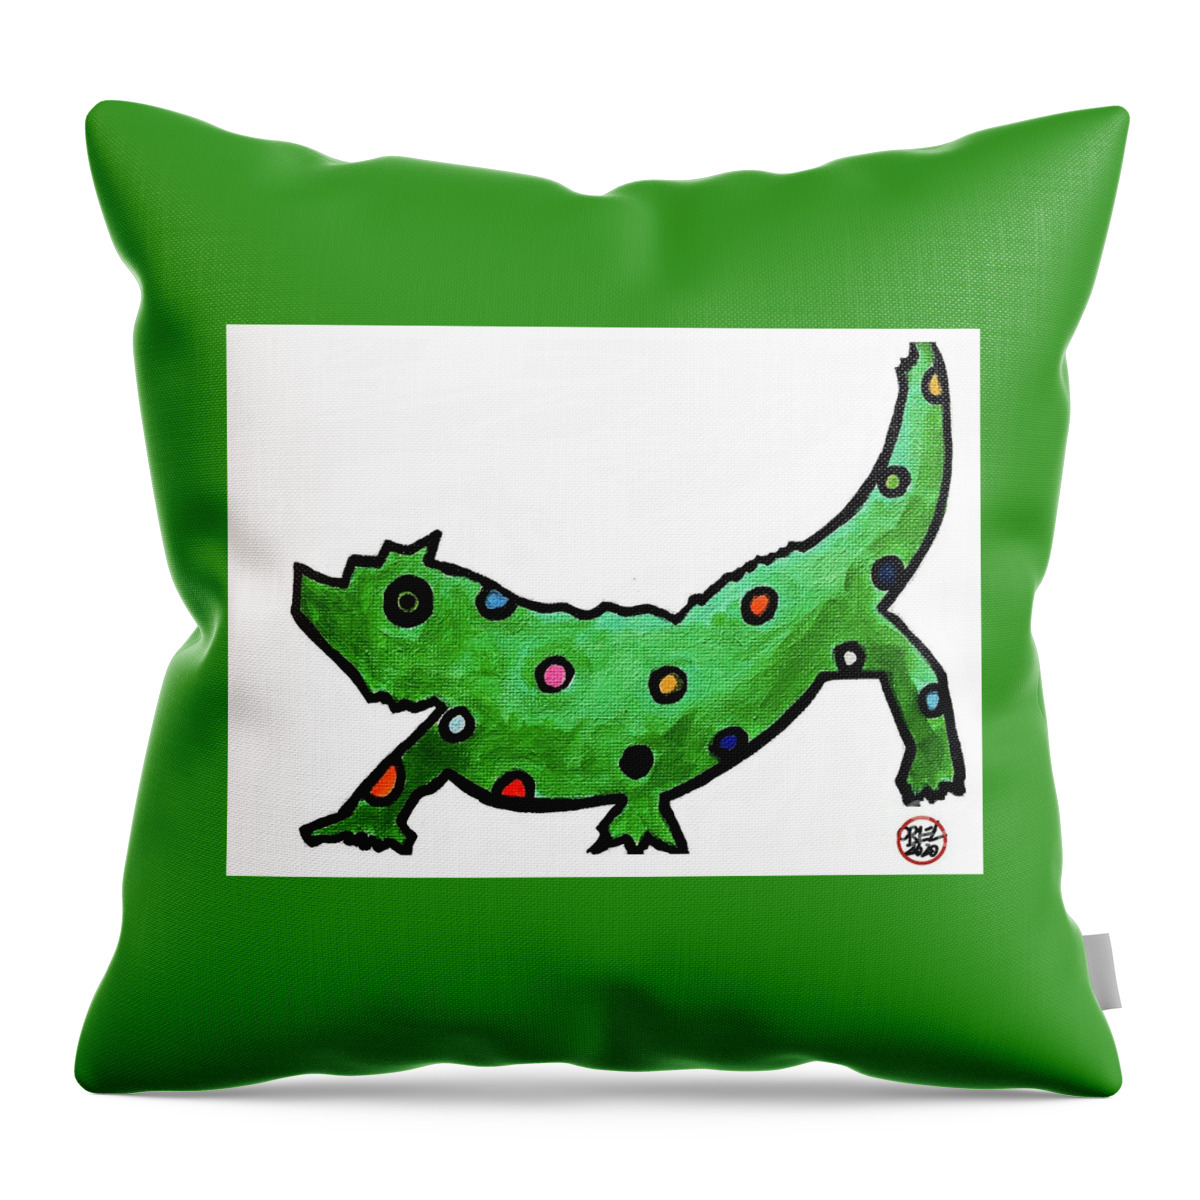  Throw Pillow featuring the painting Chameleon by Oriel Ceballos